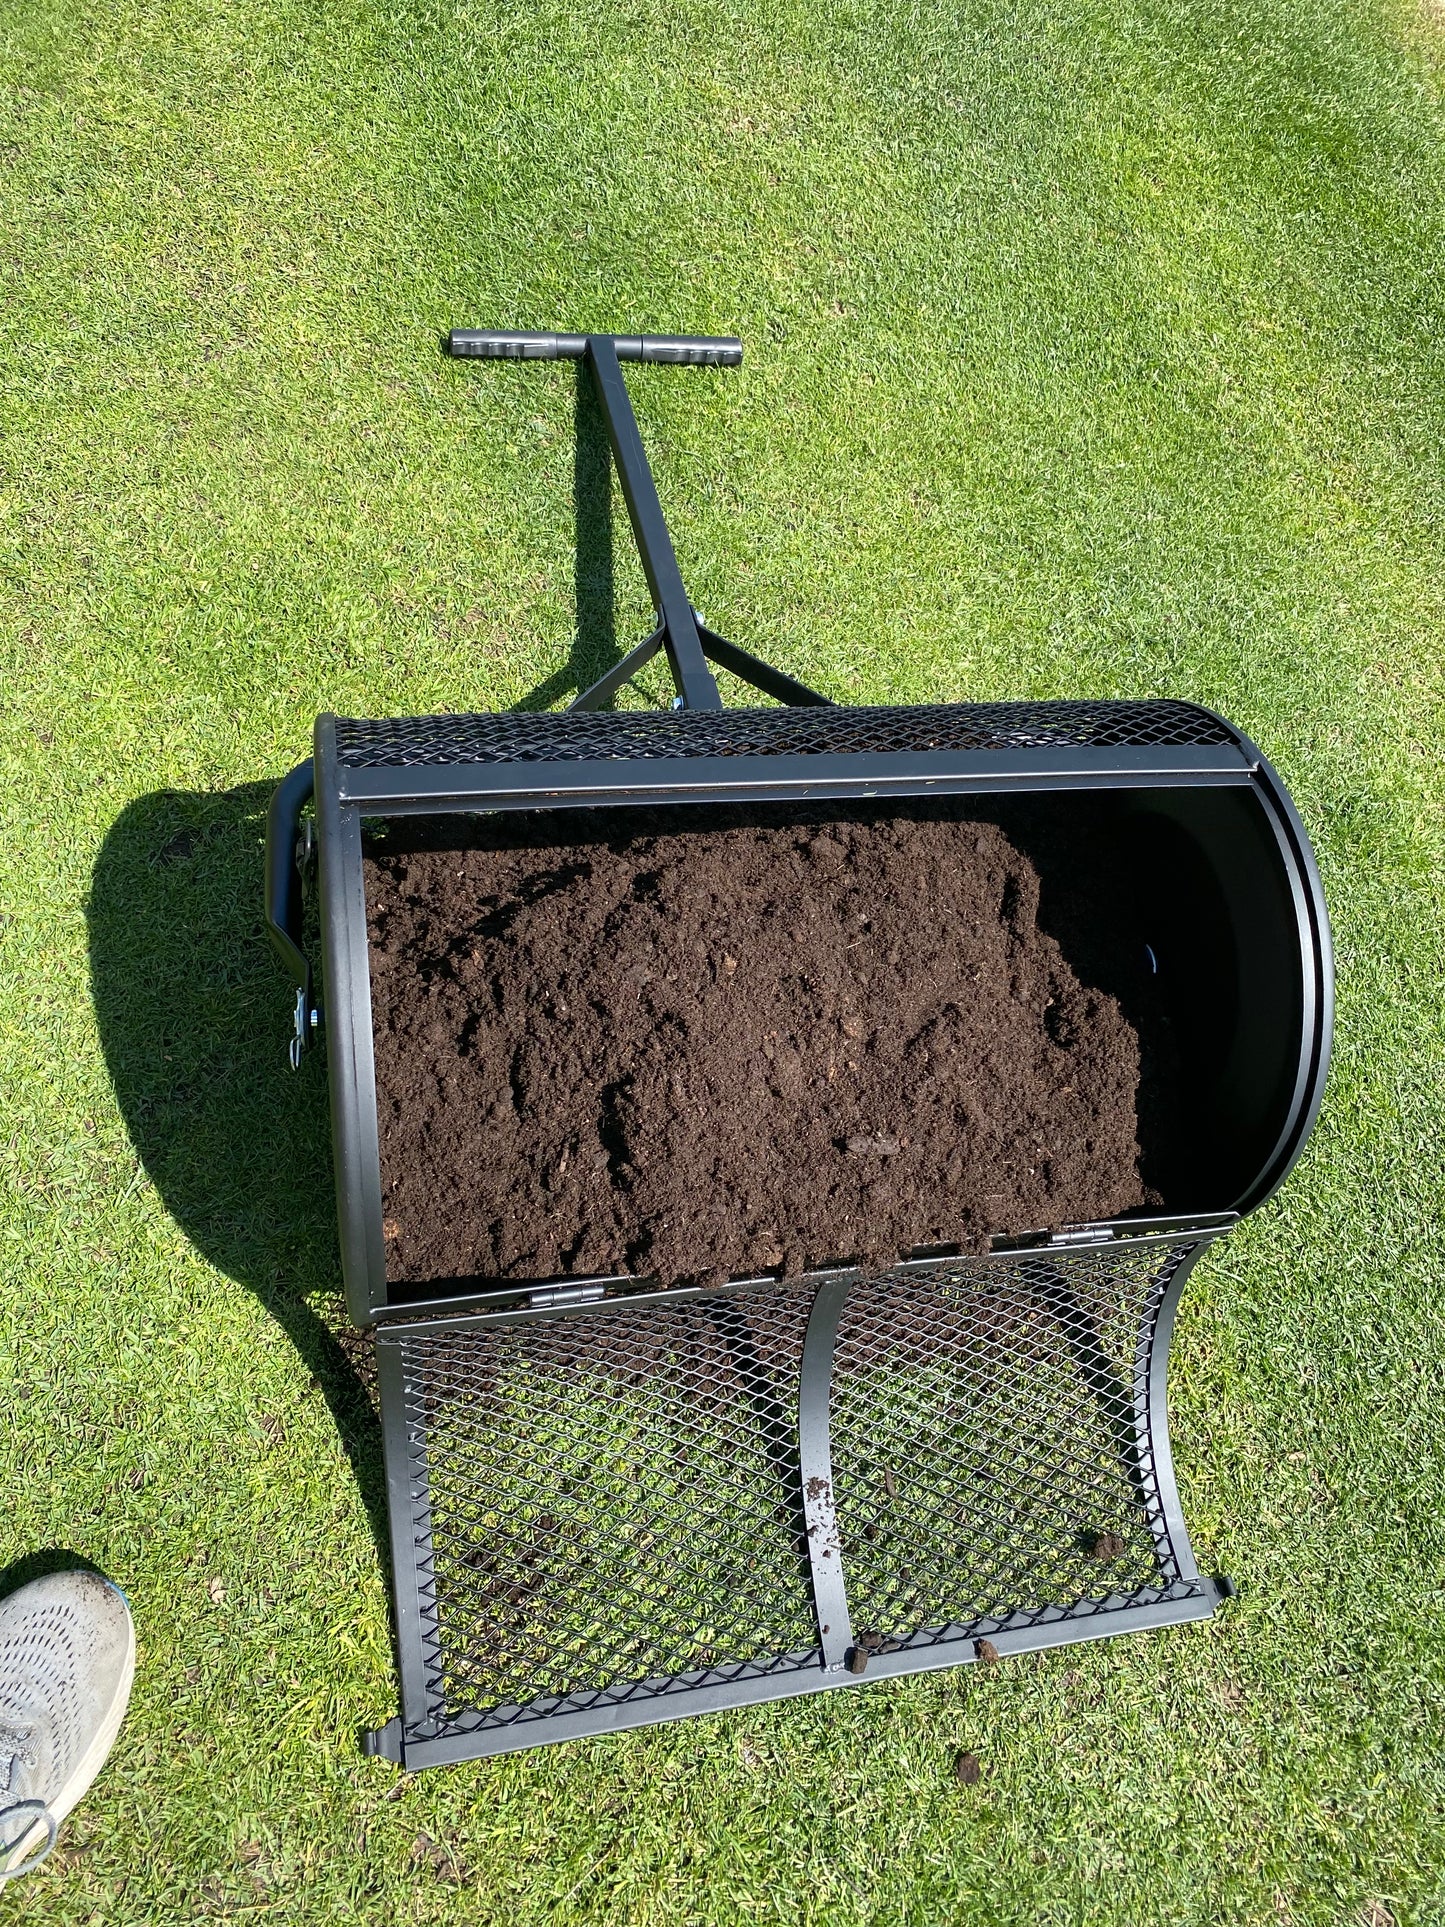 Lawn-Kit Compost Roller